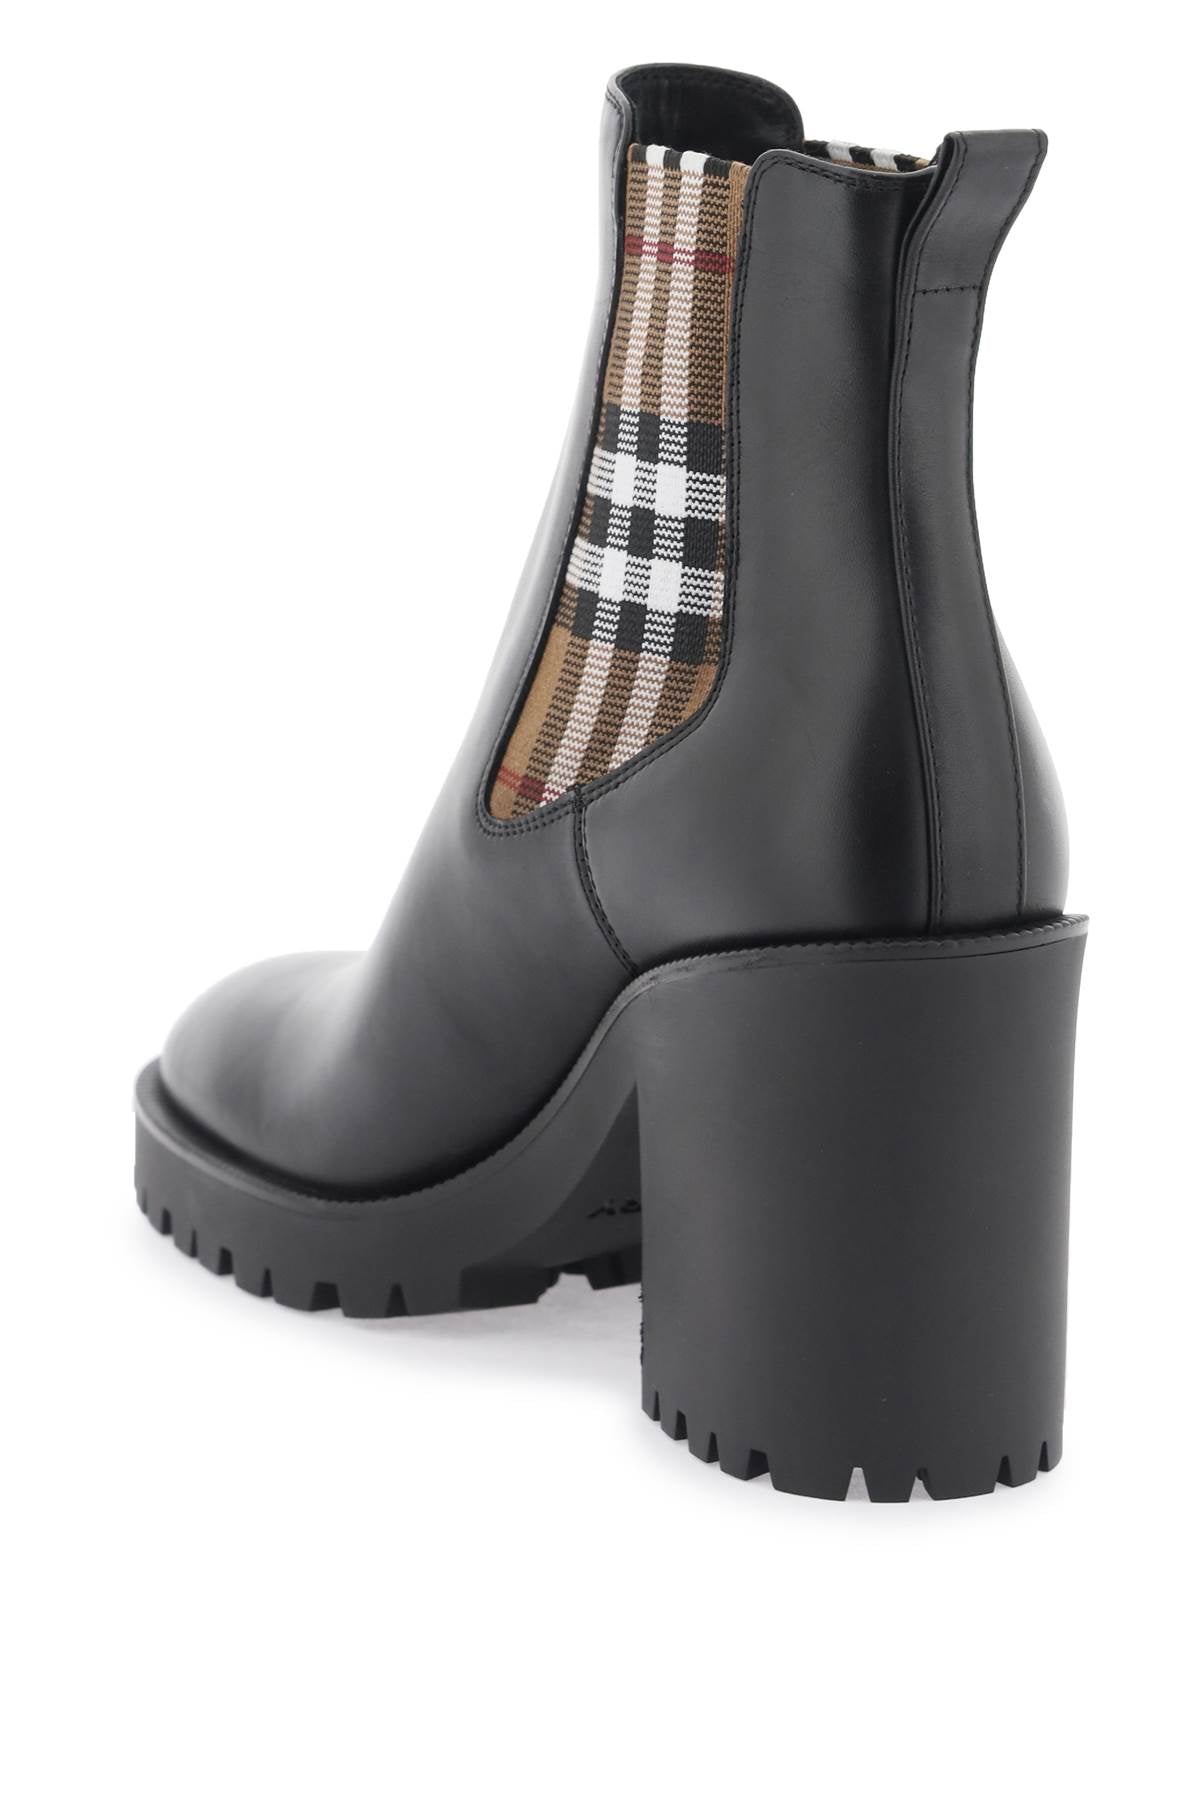 Burberry Leather Ankle Boots With Check Insert Black